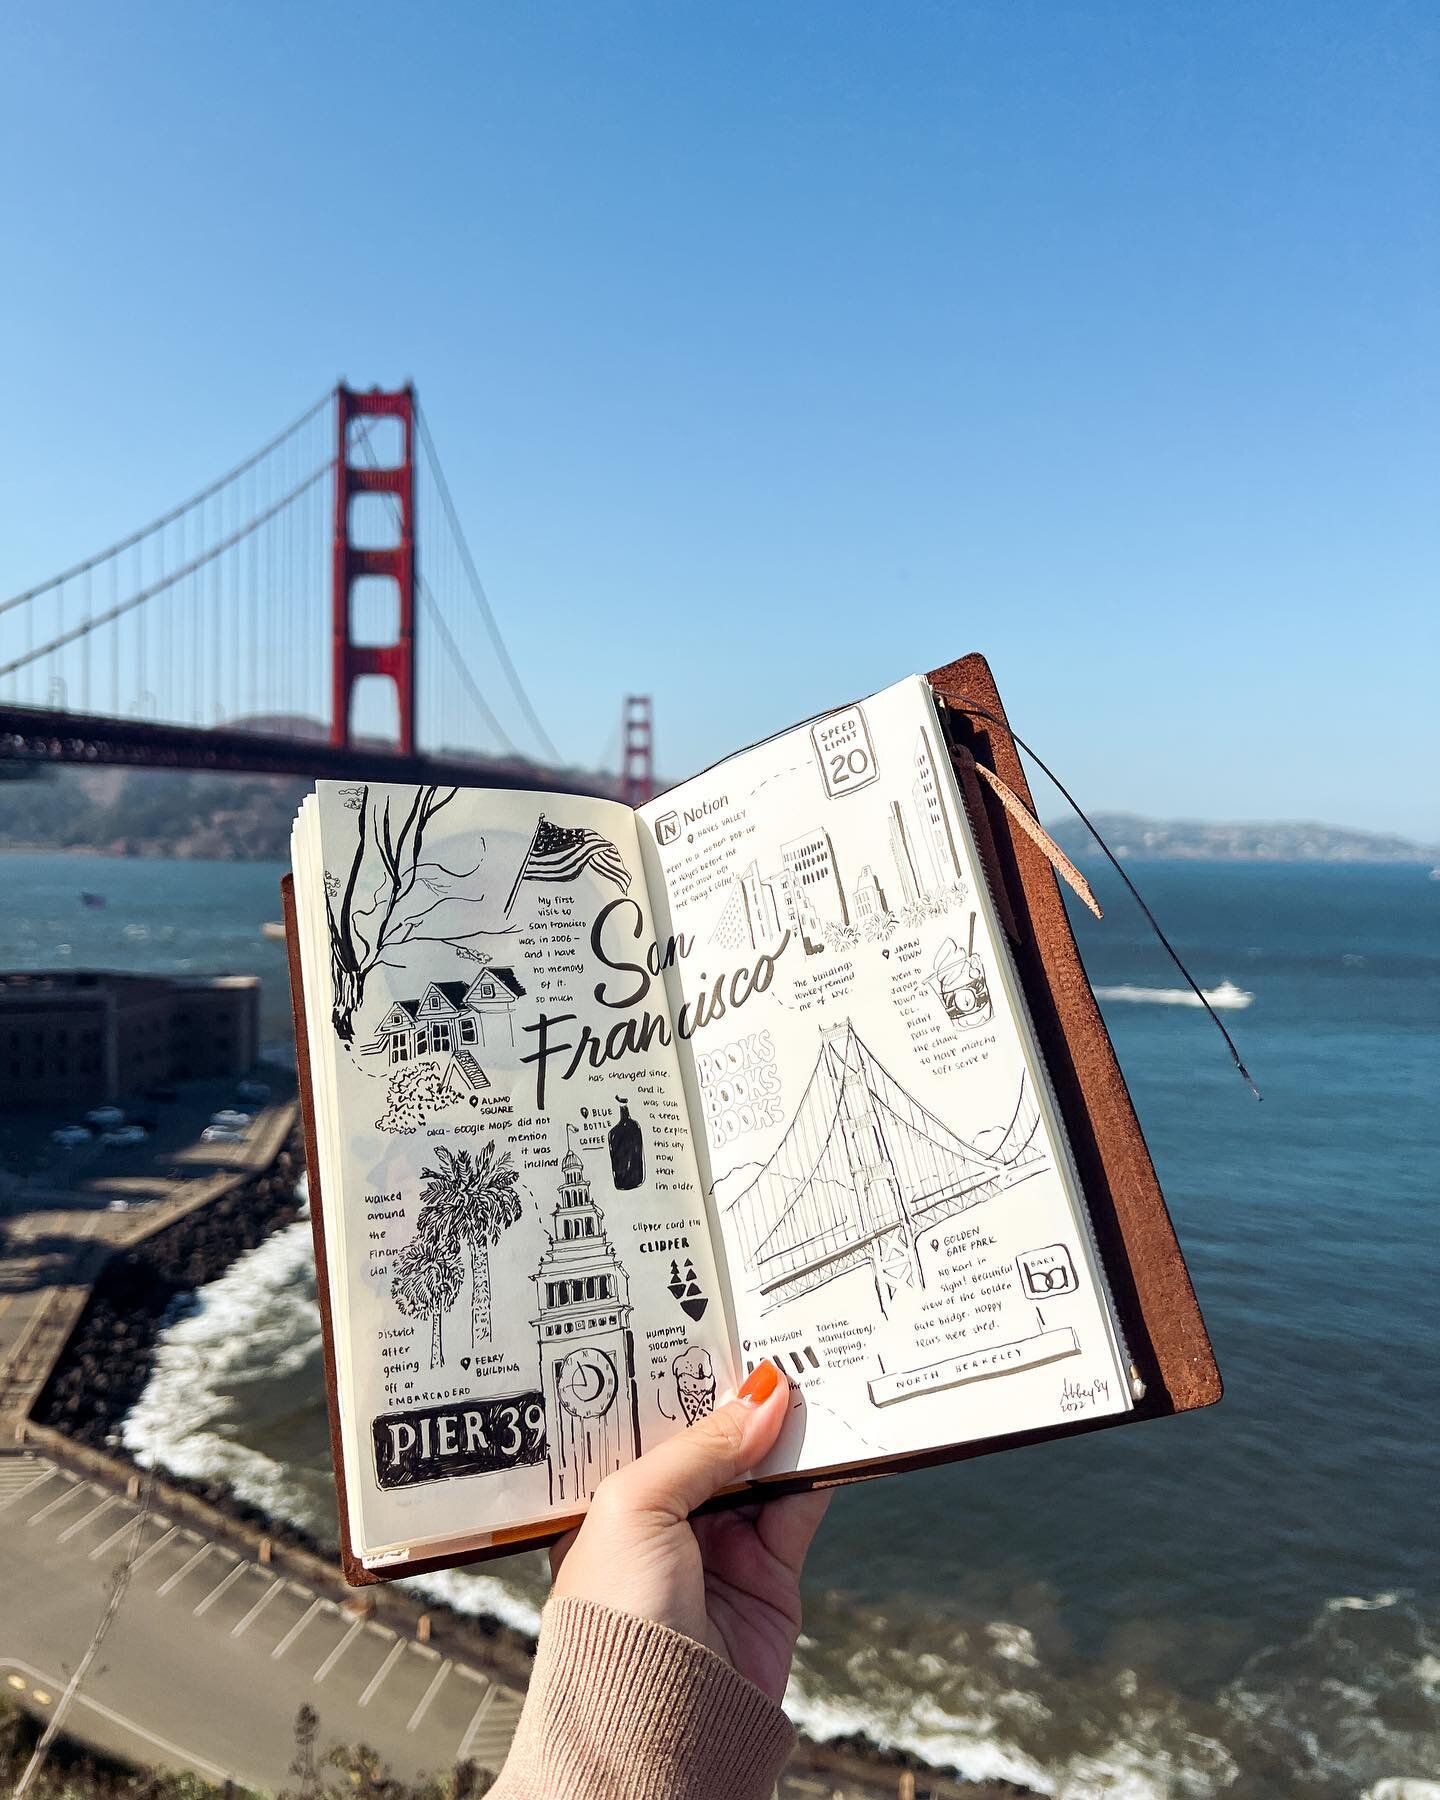 West coast photodump 📷 aka the best 2 weeks of 2022 so far 😭🫶🏻

feat. SF hangs, teaching at @caseformaking HQ, lots of coffee/walking/shopping, alone time at Embarcadero, and meeting friends from the pen &amp; stationery community at the @sfpensh